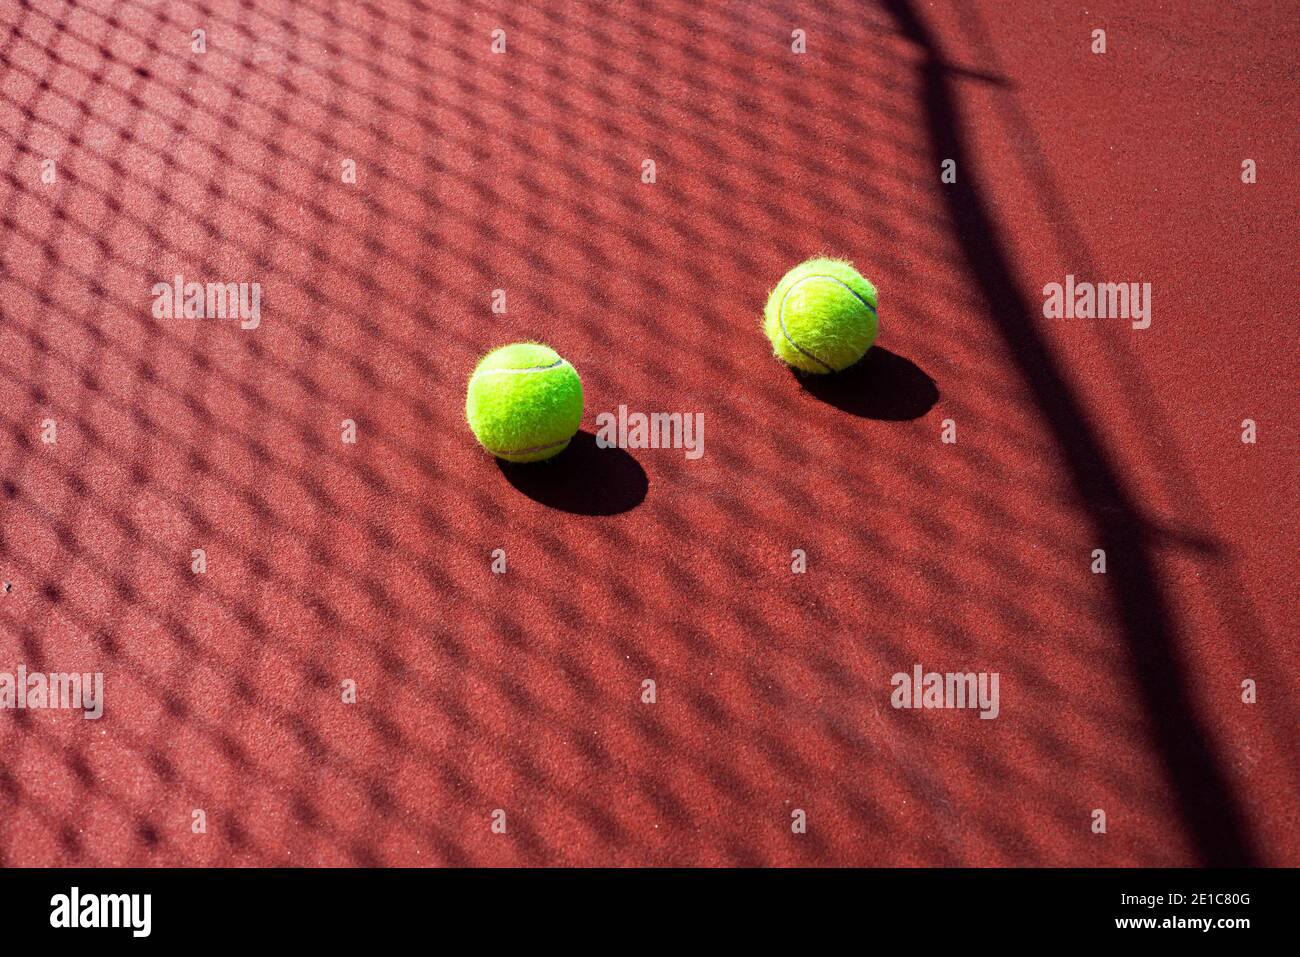 Two tennis balls on a hard court in a passable color. Mesh shadow. Tennis. Stock Photo